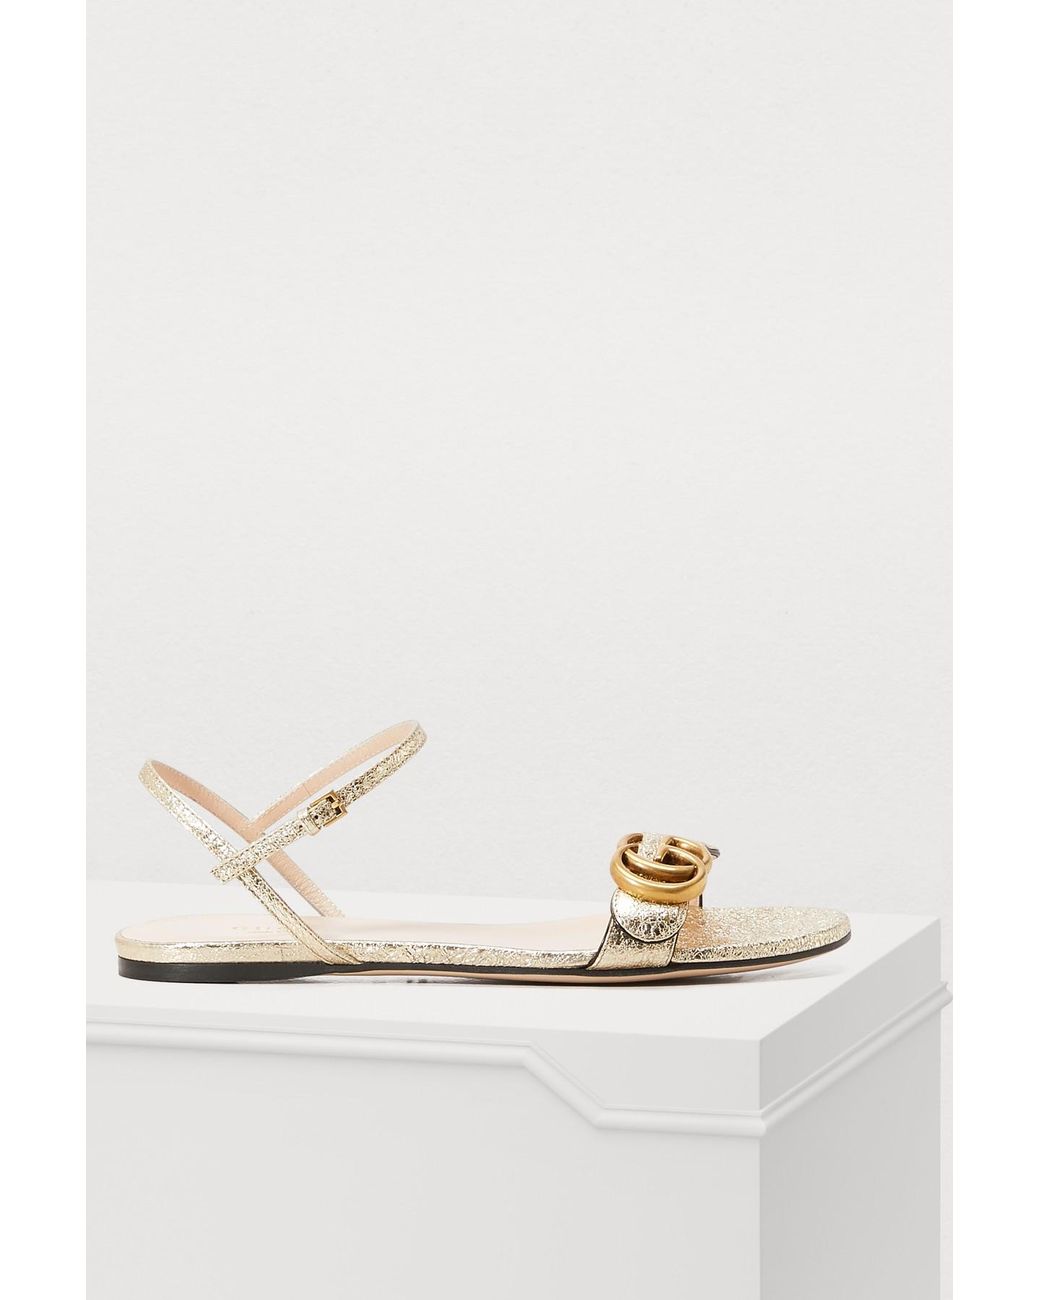 Gucci Leather GG Marmont Sandals in Gold (Metallic) | Lyst